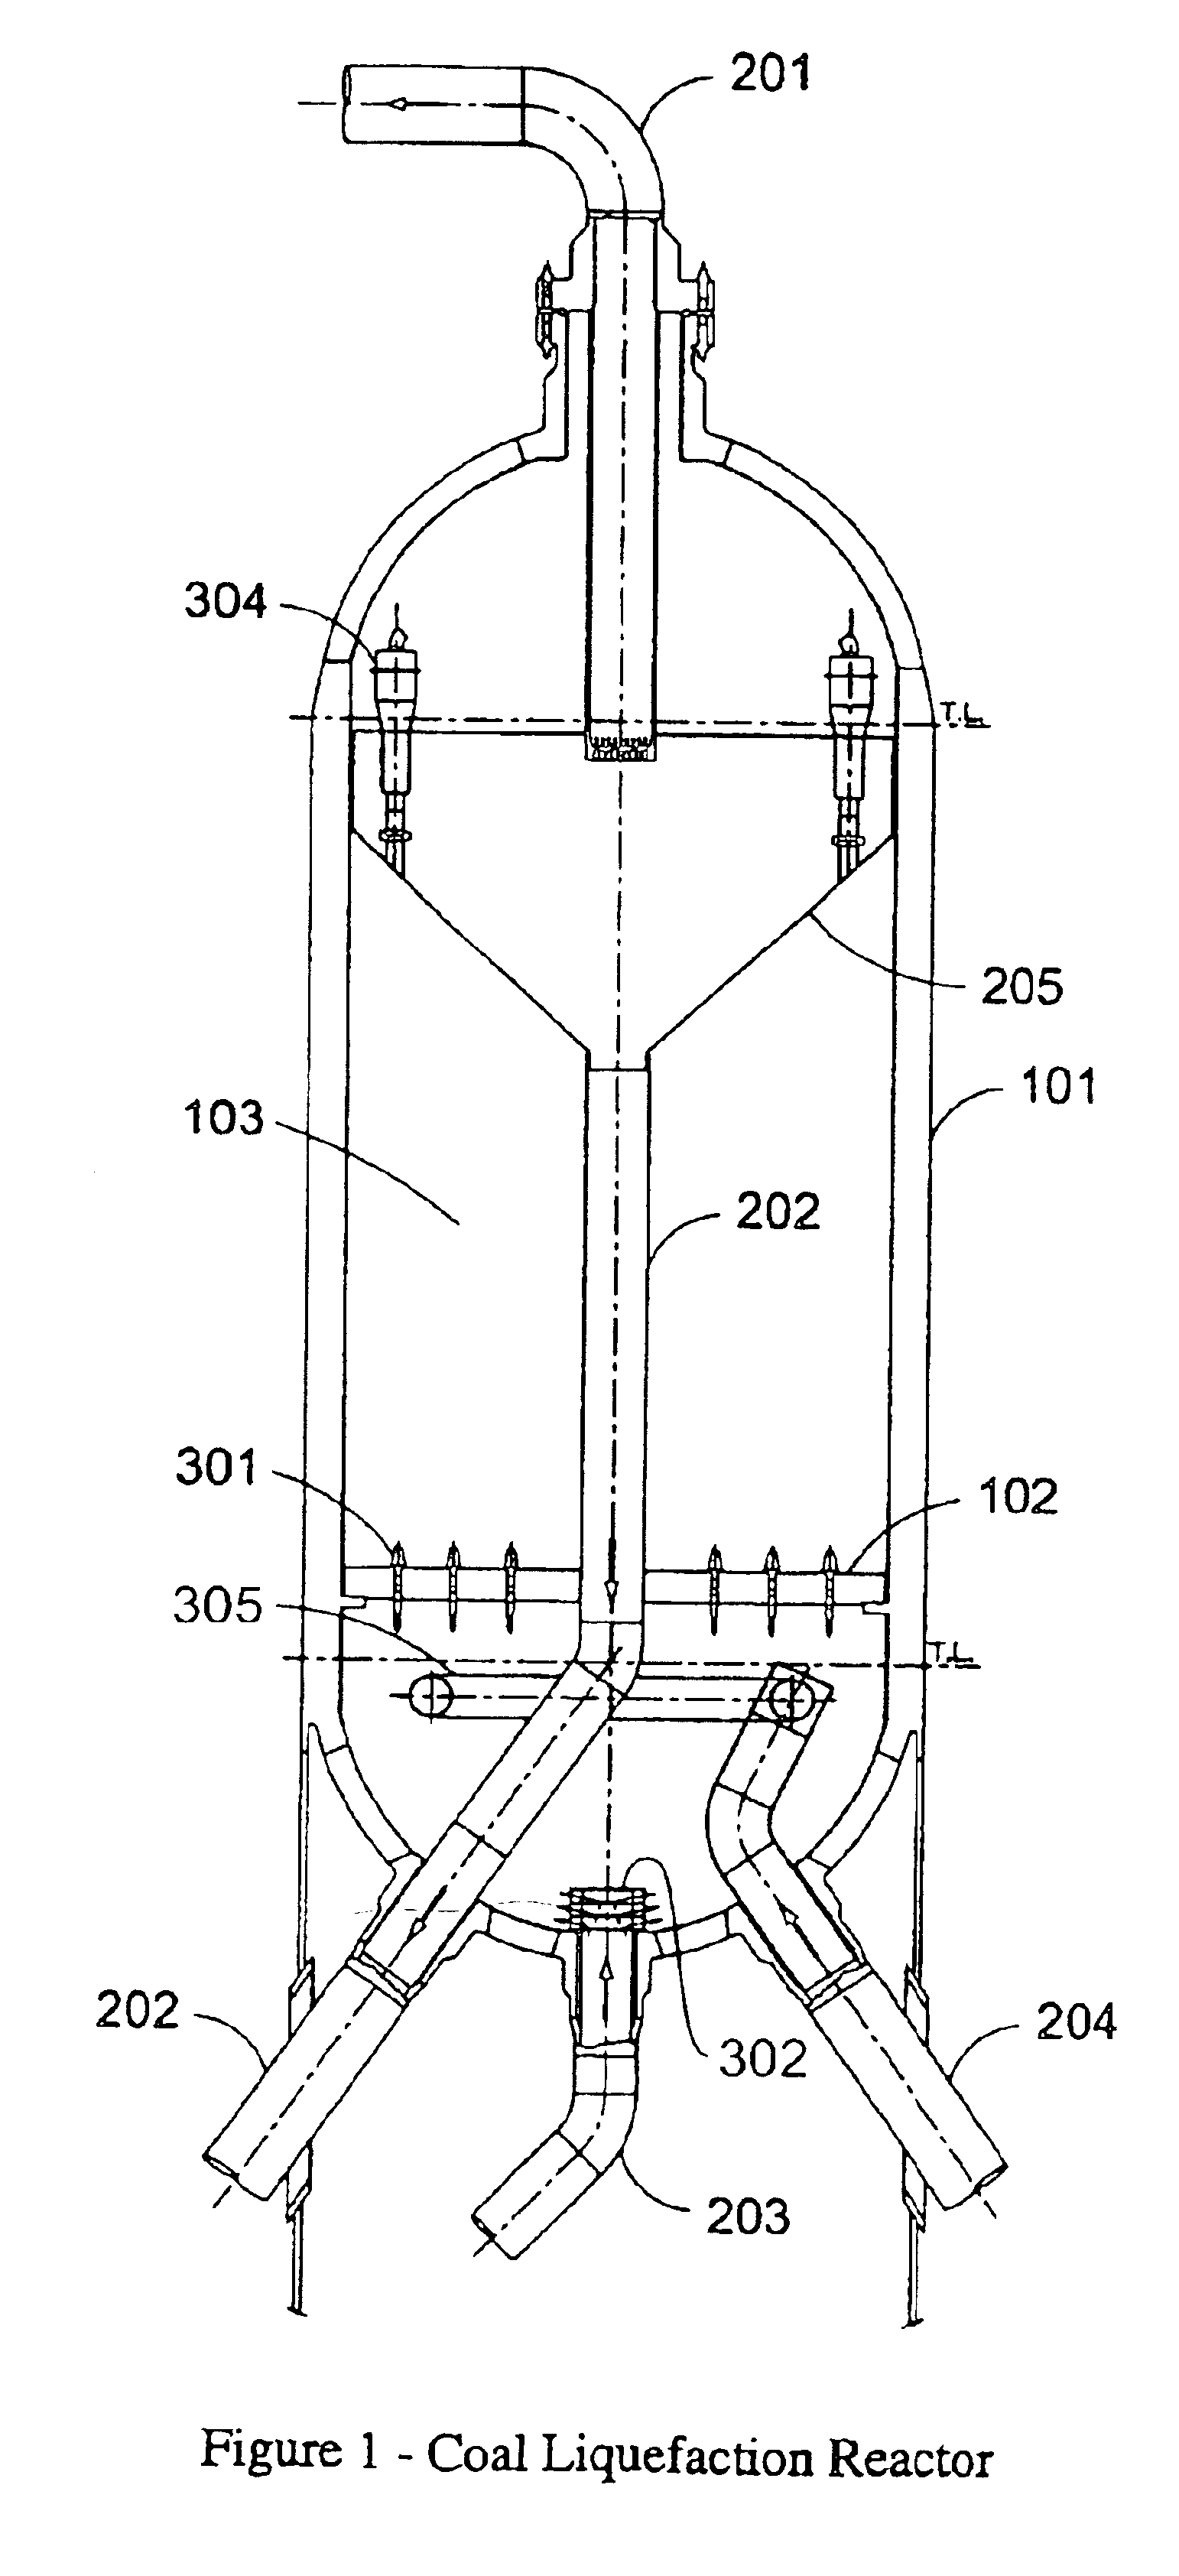 Apparatus for hydrocracking and/or hydrogenating fossil fuels